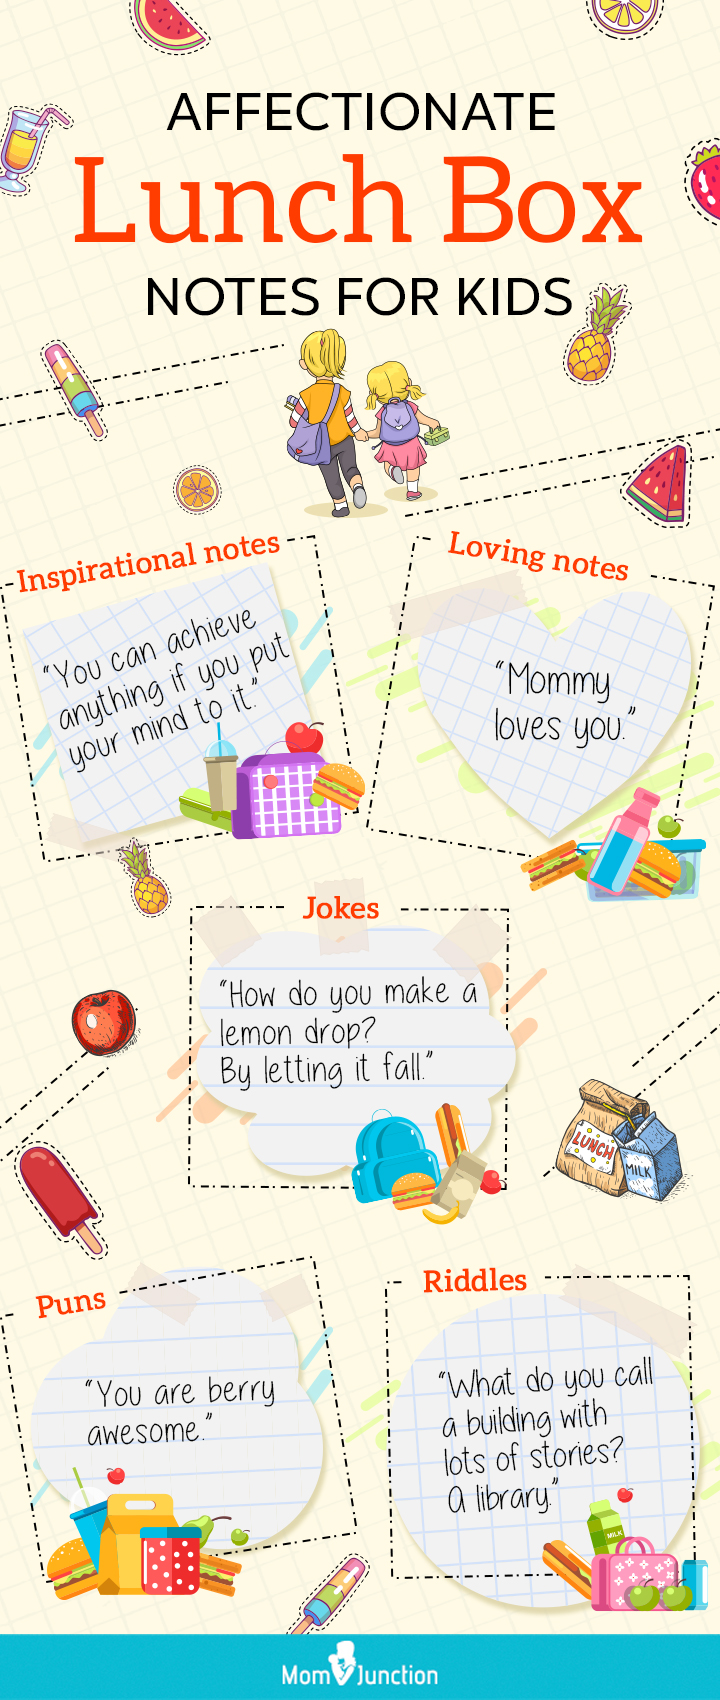 affectionate lunch box notes for kids (Infographic)